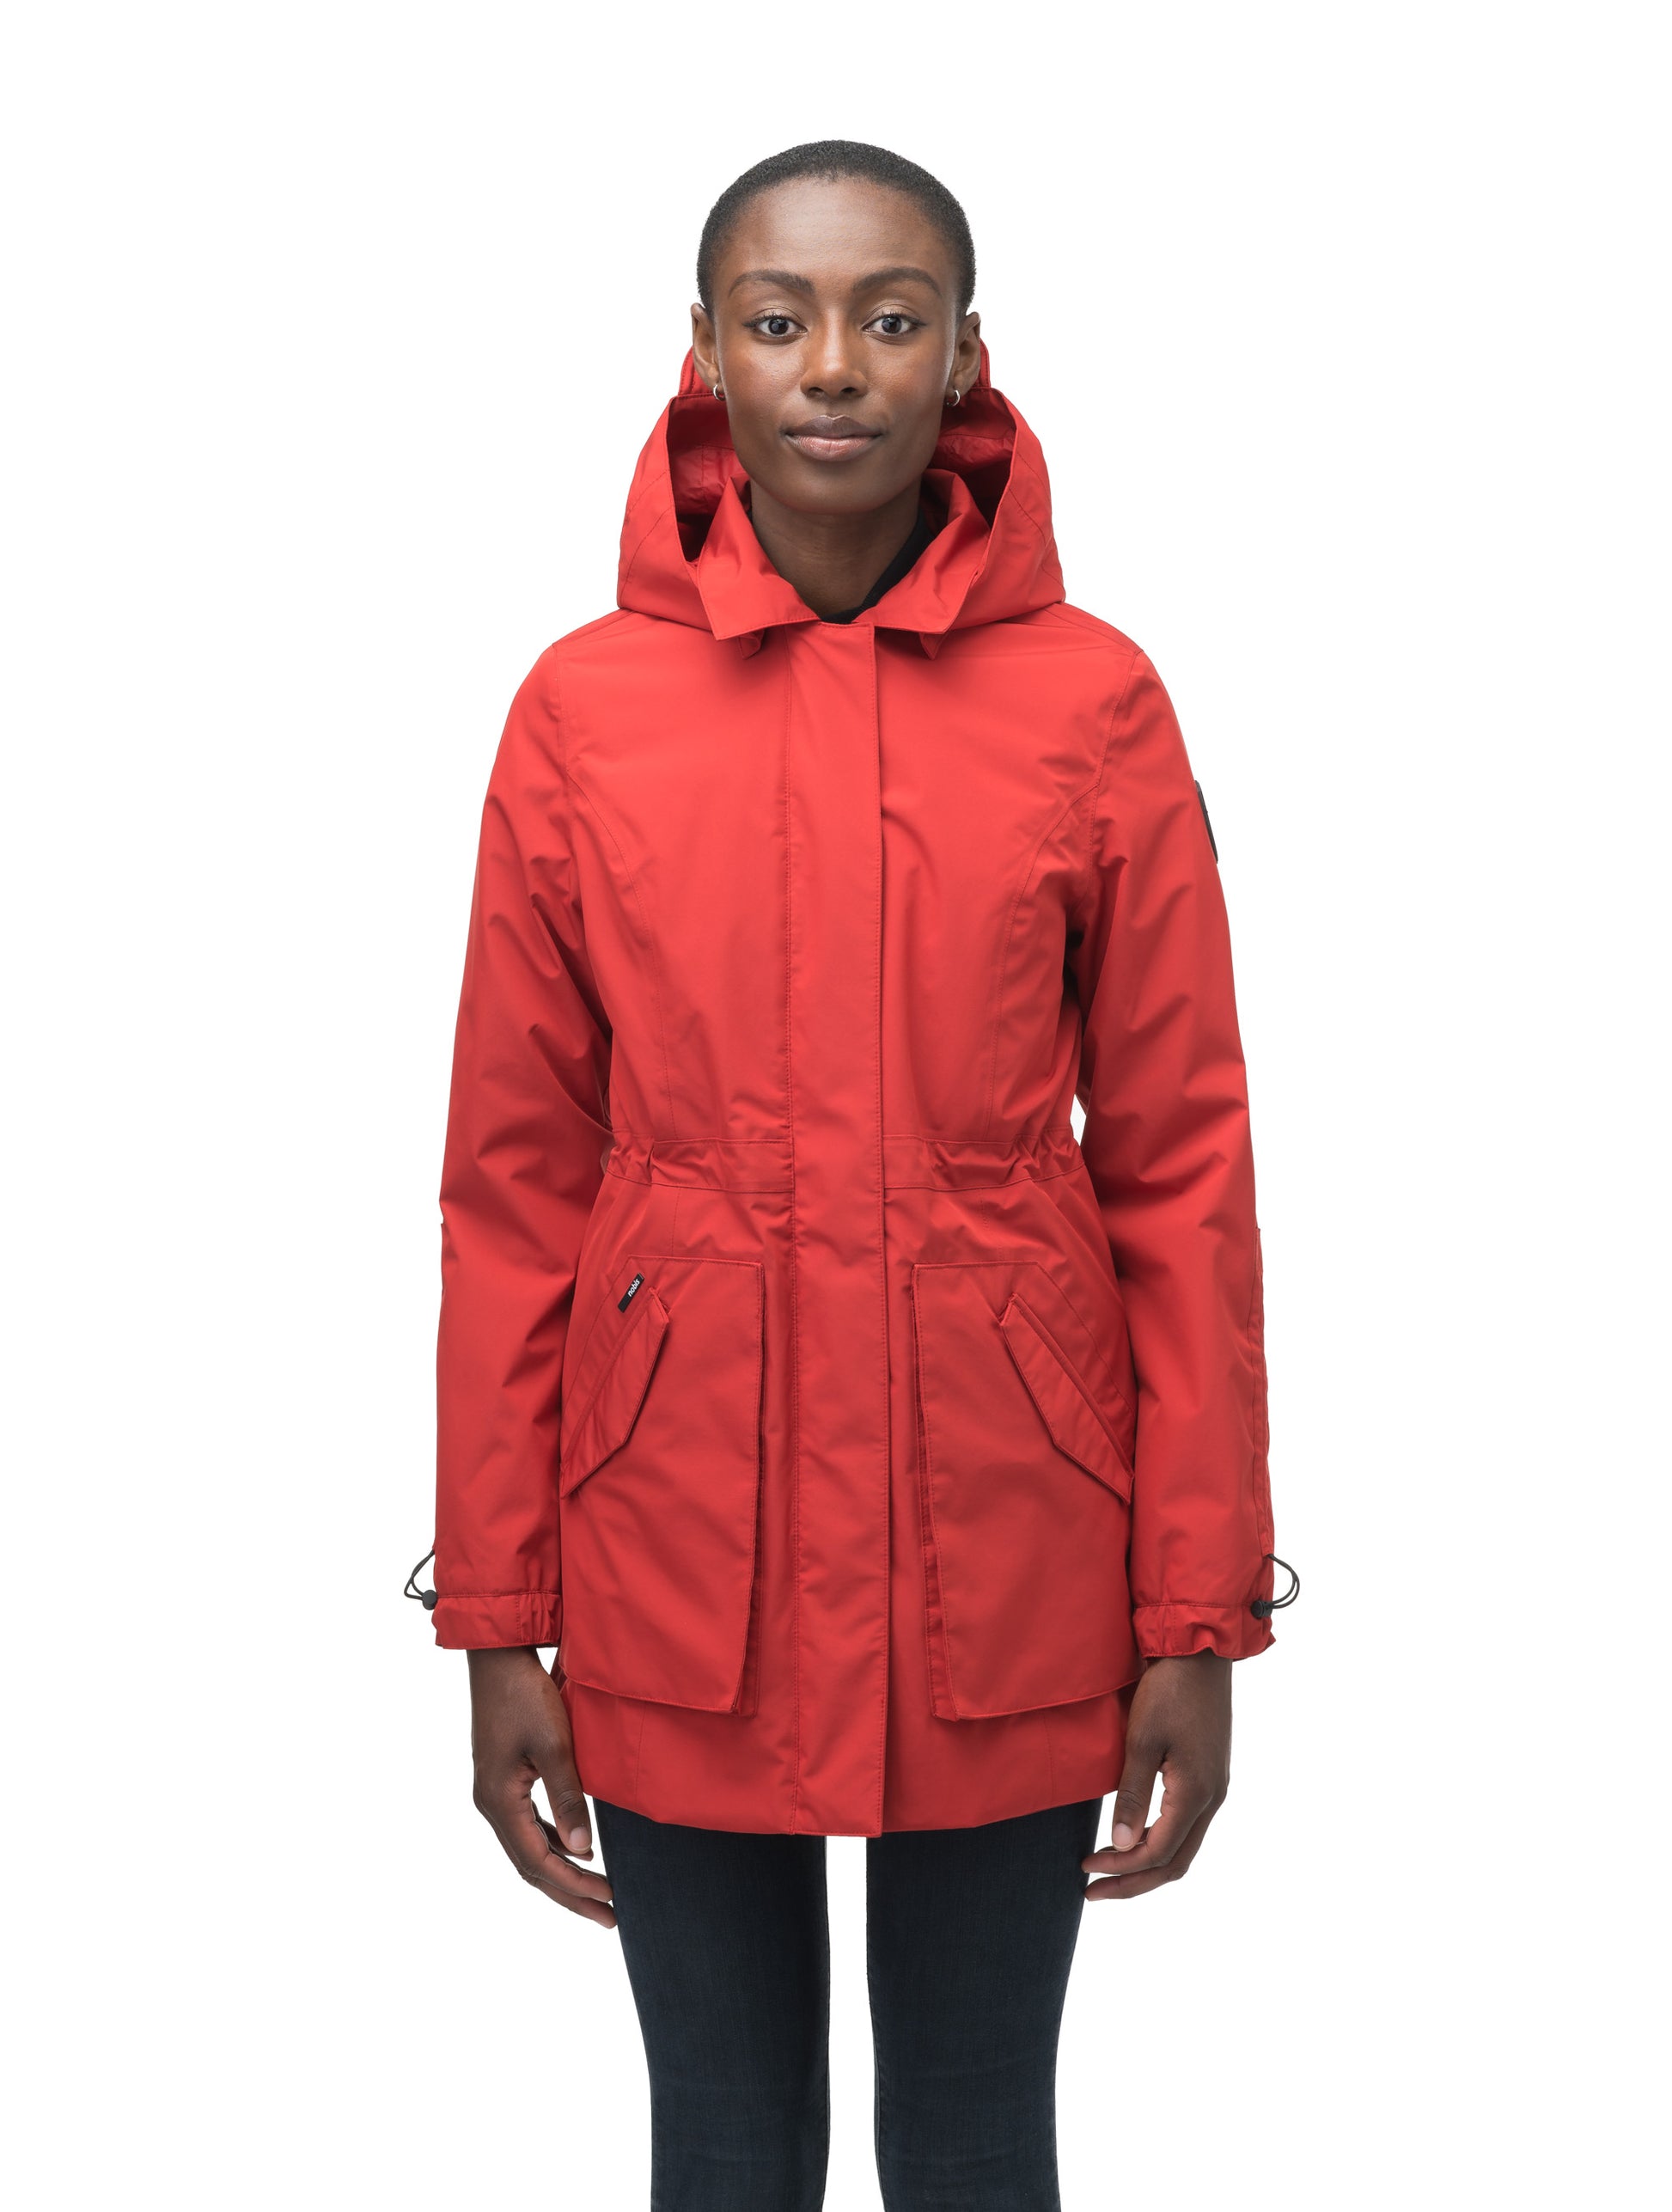 Women's thigh length raincoat with collar and non-removable hood in Vermillion